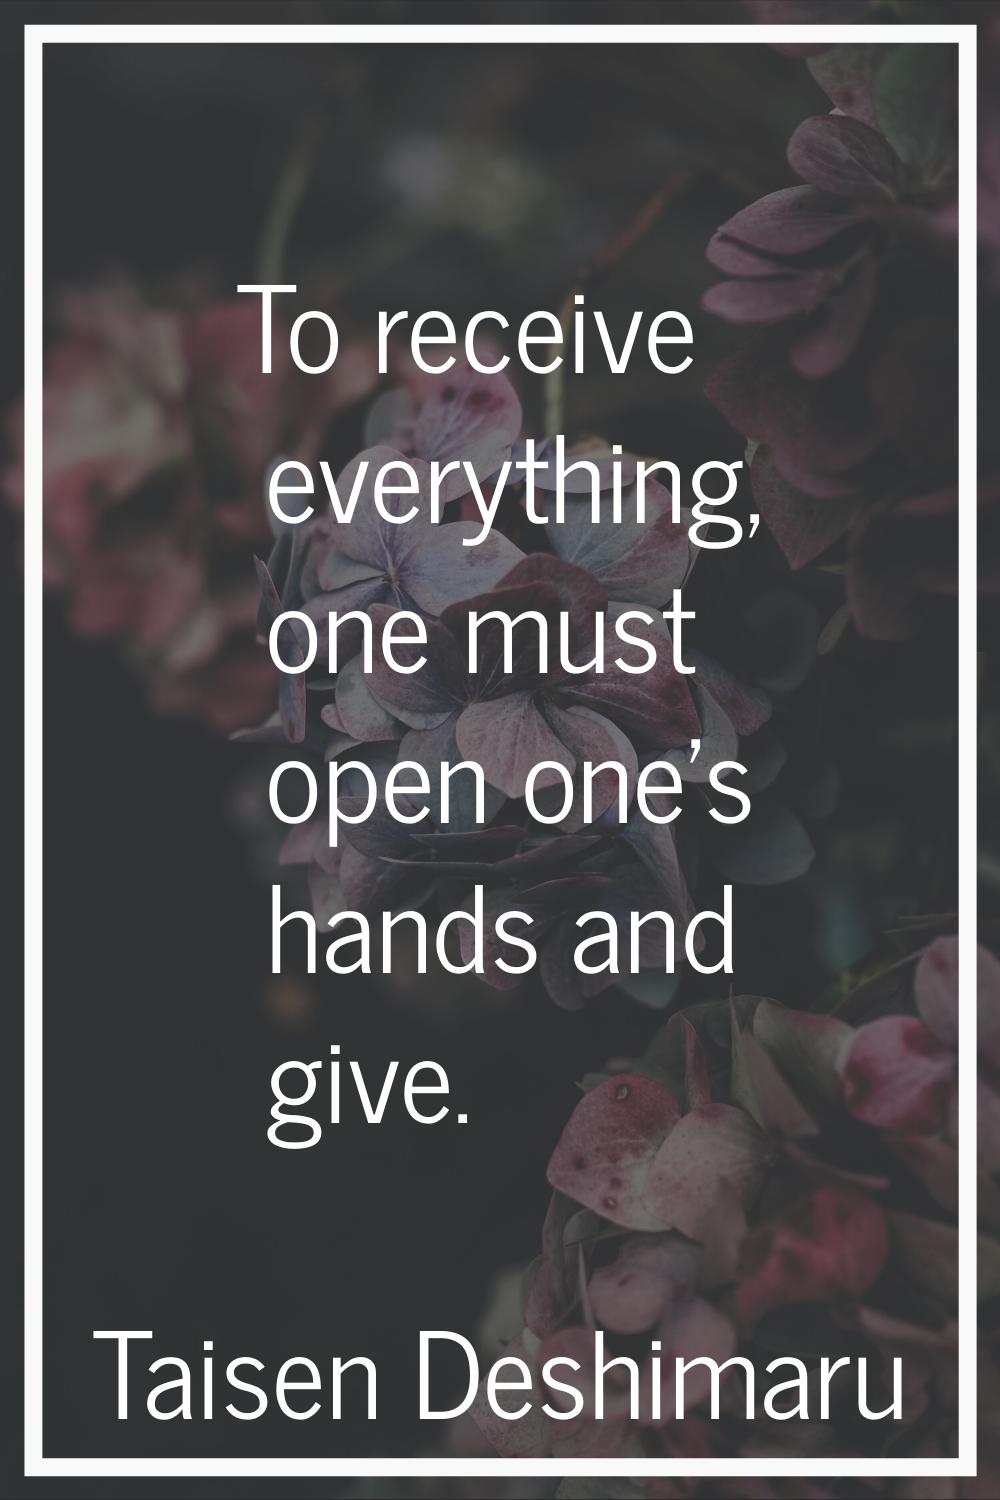 To receive everything, one must open one's hands and give.